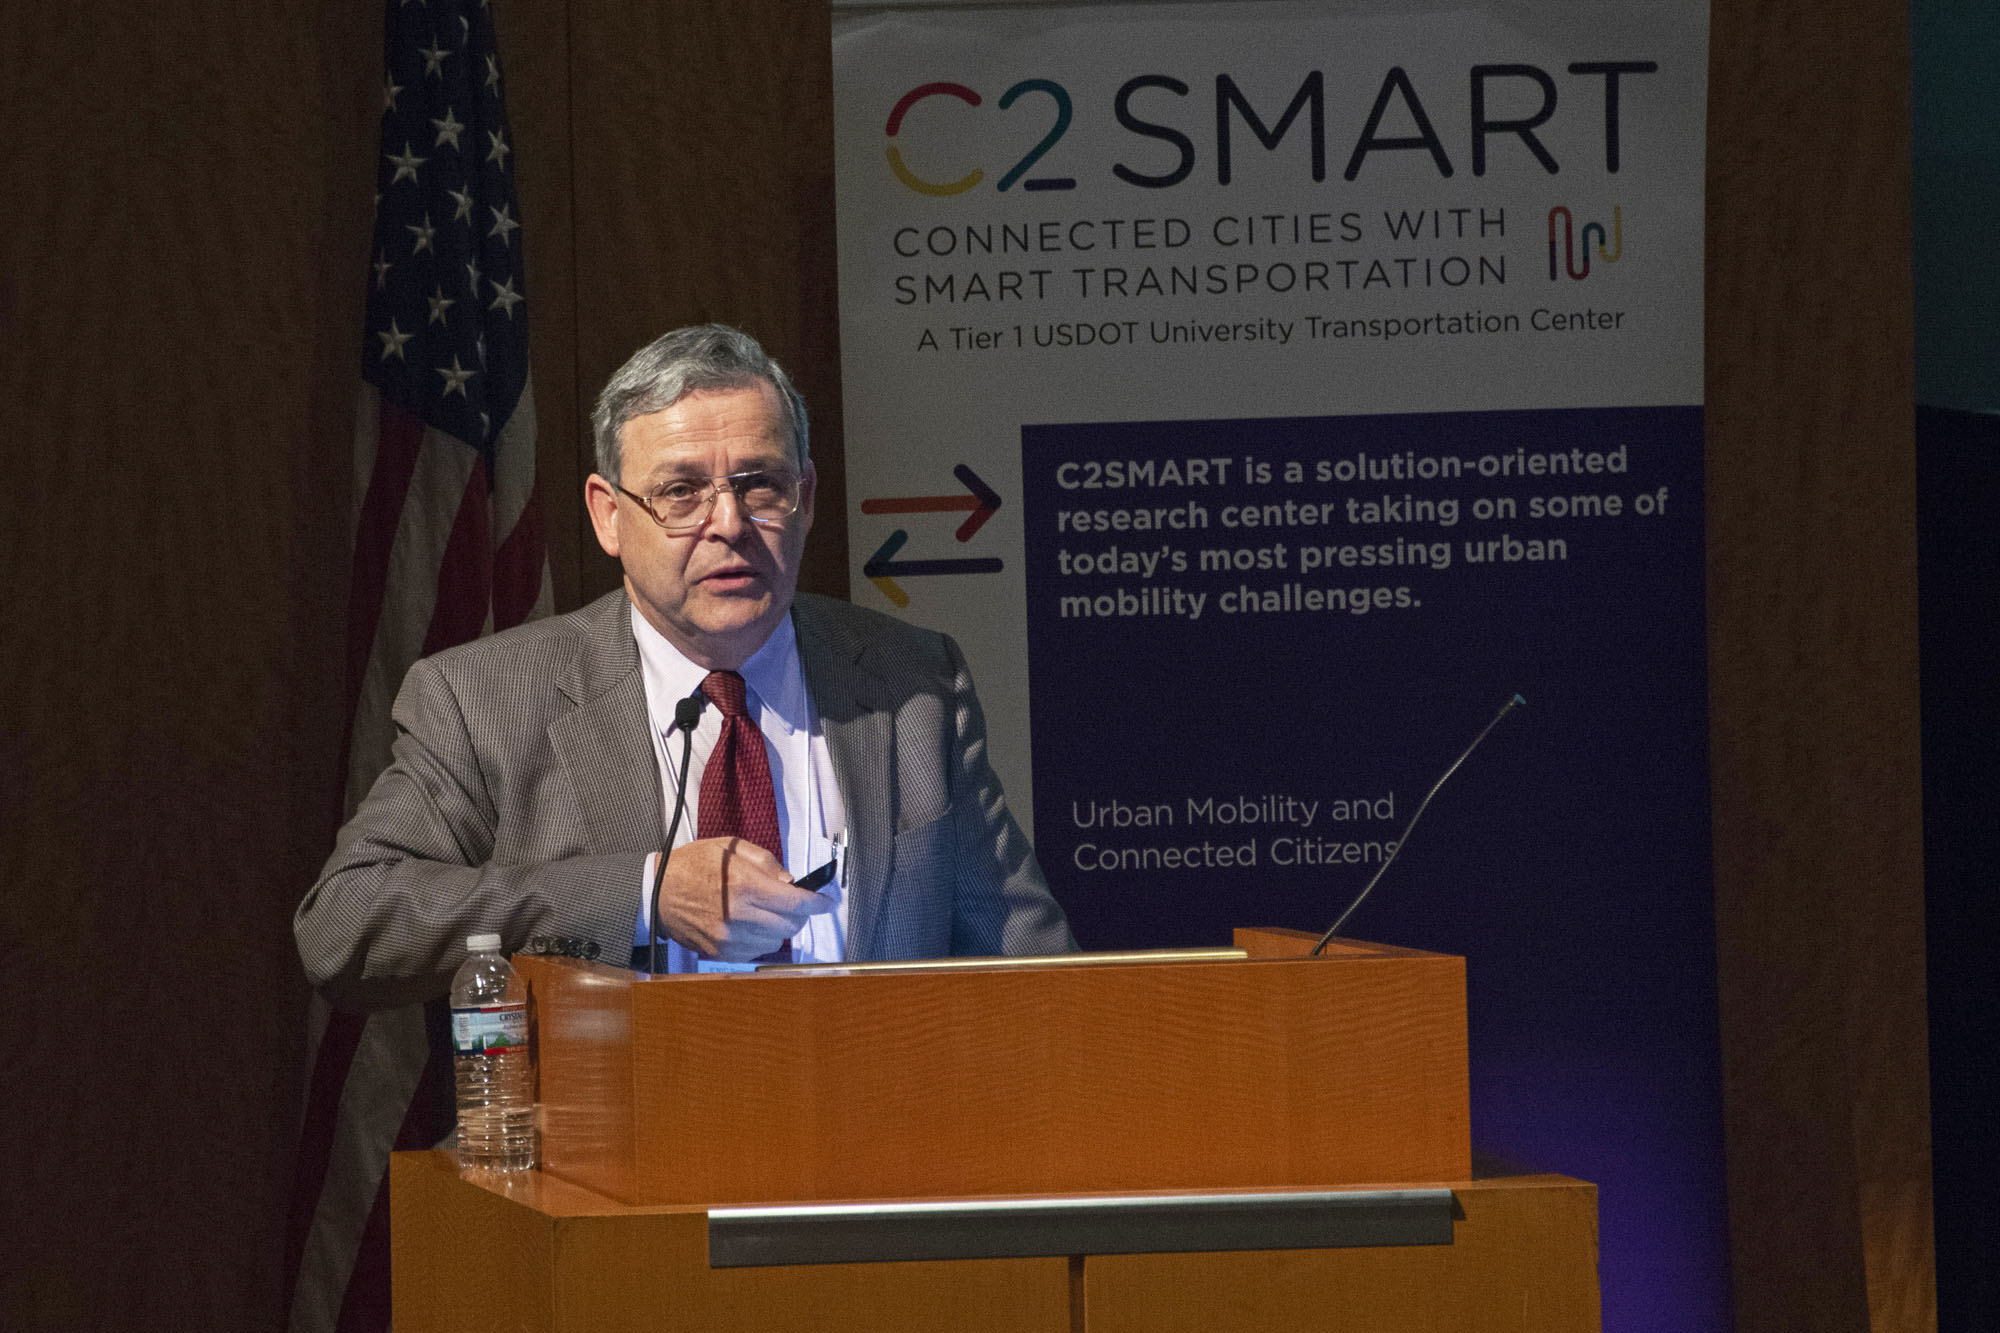 Keynote speaker Steven Shladover from the University of California Berkeley PATH program offers his analysis of the practical challenges involved in deploying highly automated vehicles.